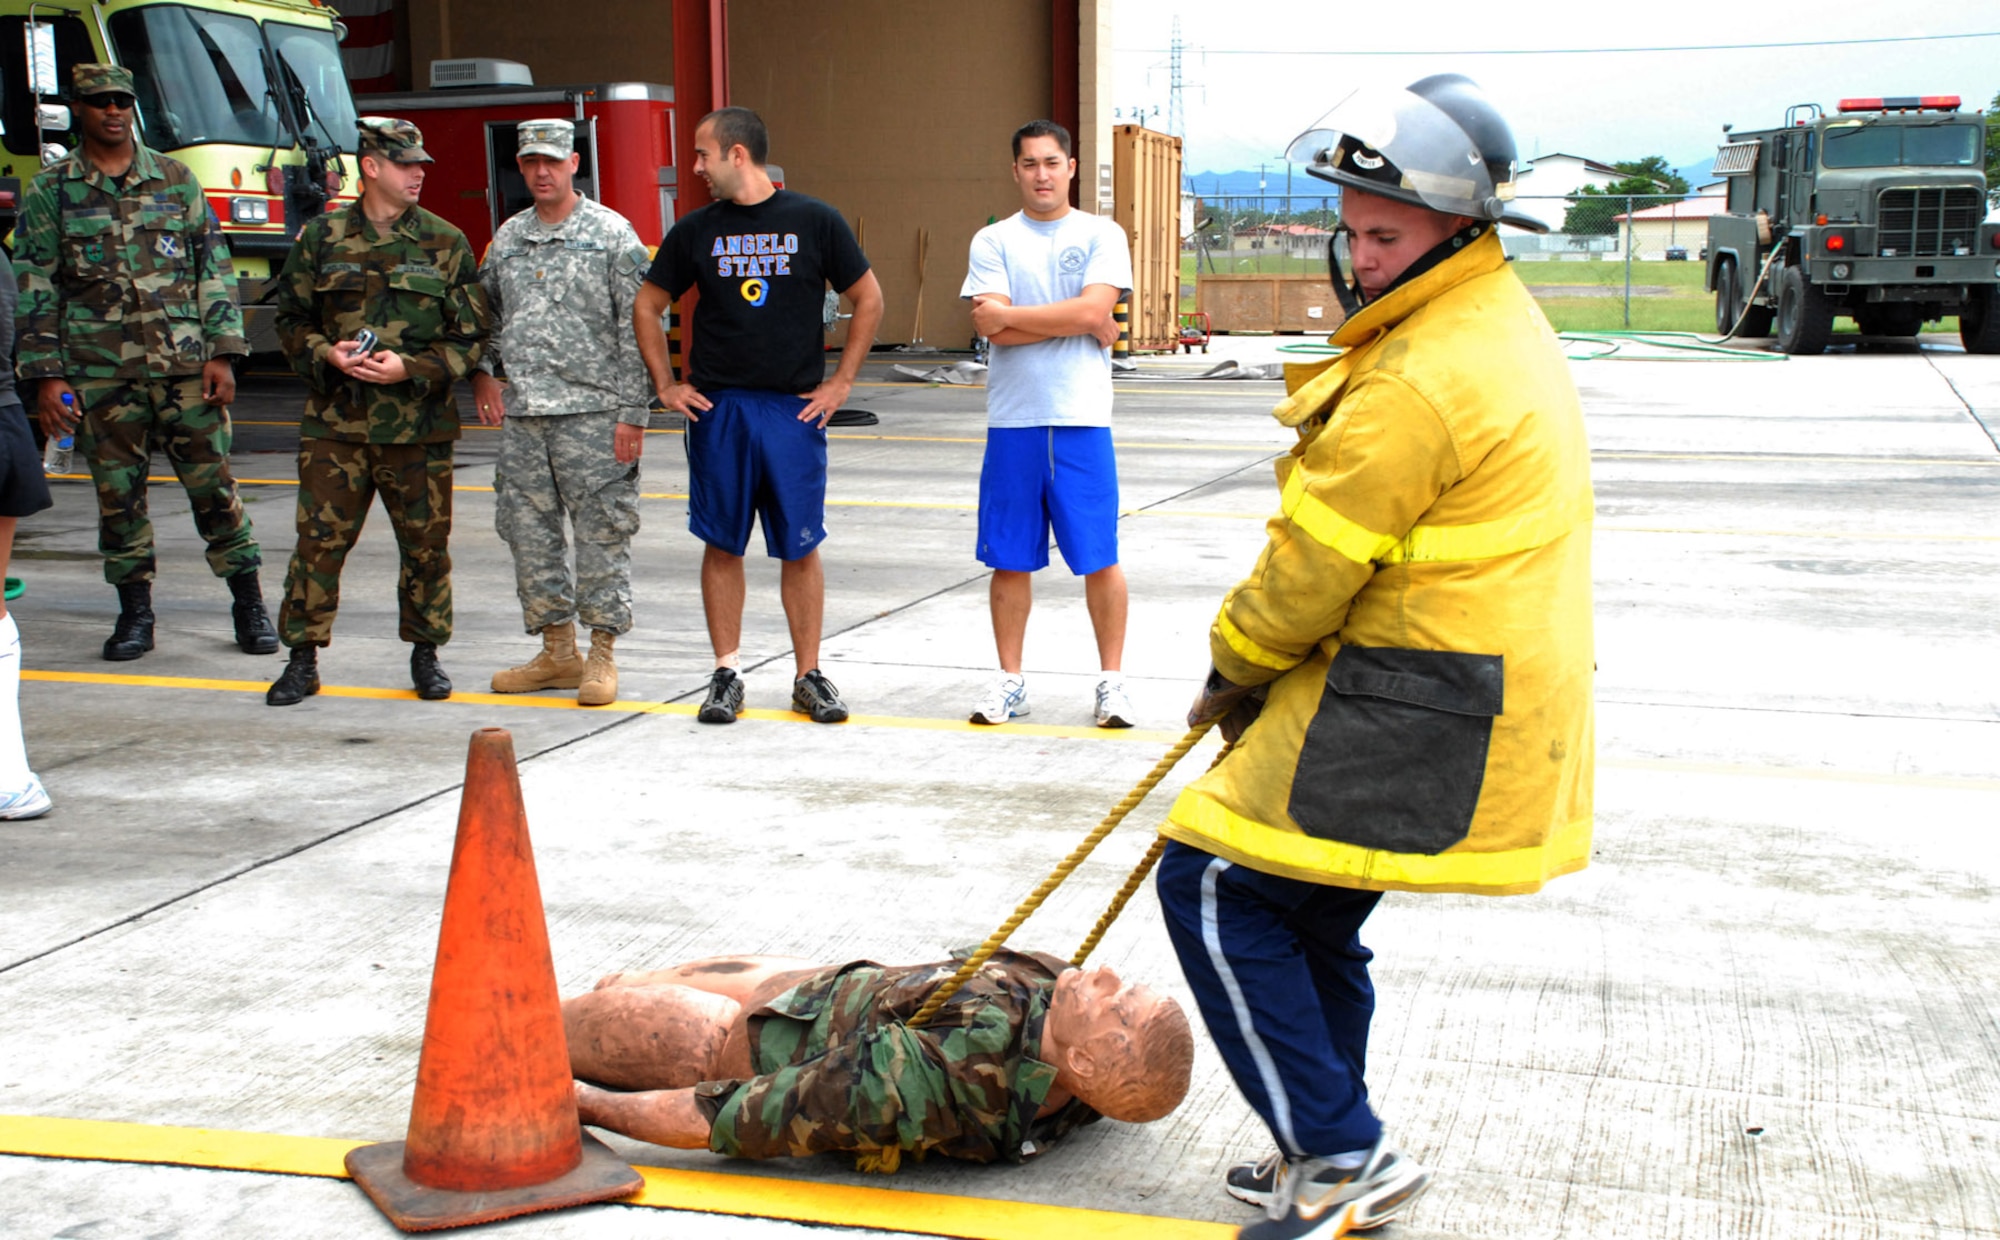 SOTO CANO AIR BASE, Honduras - Army 2nd Lt. Miles Hamlett, Joint Task Force Bravo Medical Element, weaves through cones dragging a mannequin in the Fire Department's Fire Muster Challenge here Oct. 12.  The relay challenge was Soto Cano Fire Department's closing event for Fire Prevention Week.  (U.S. Air Force photo by 1st Lt. Erika Yepsen)